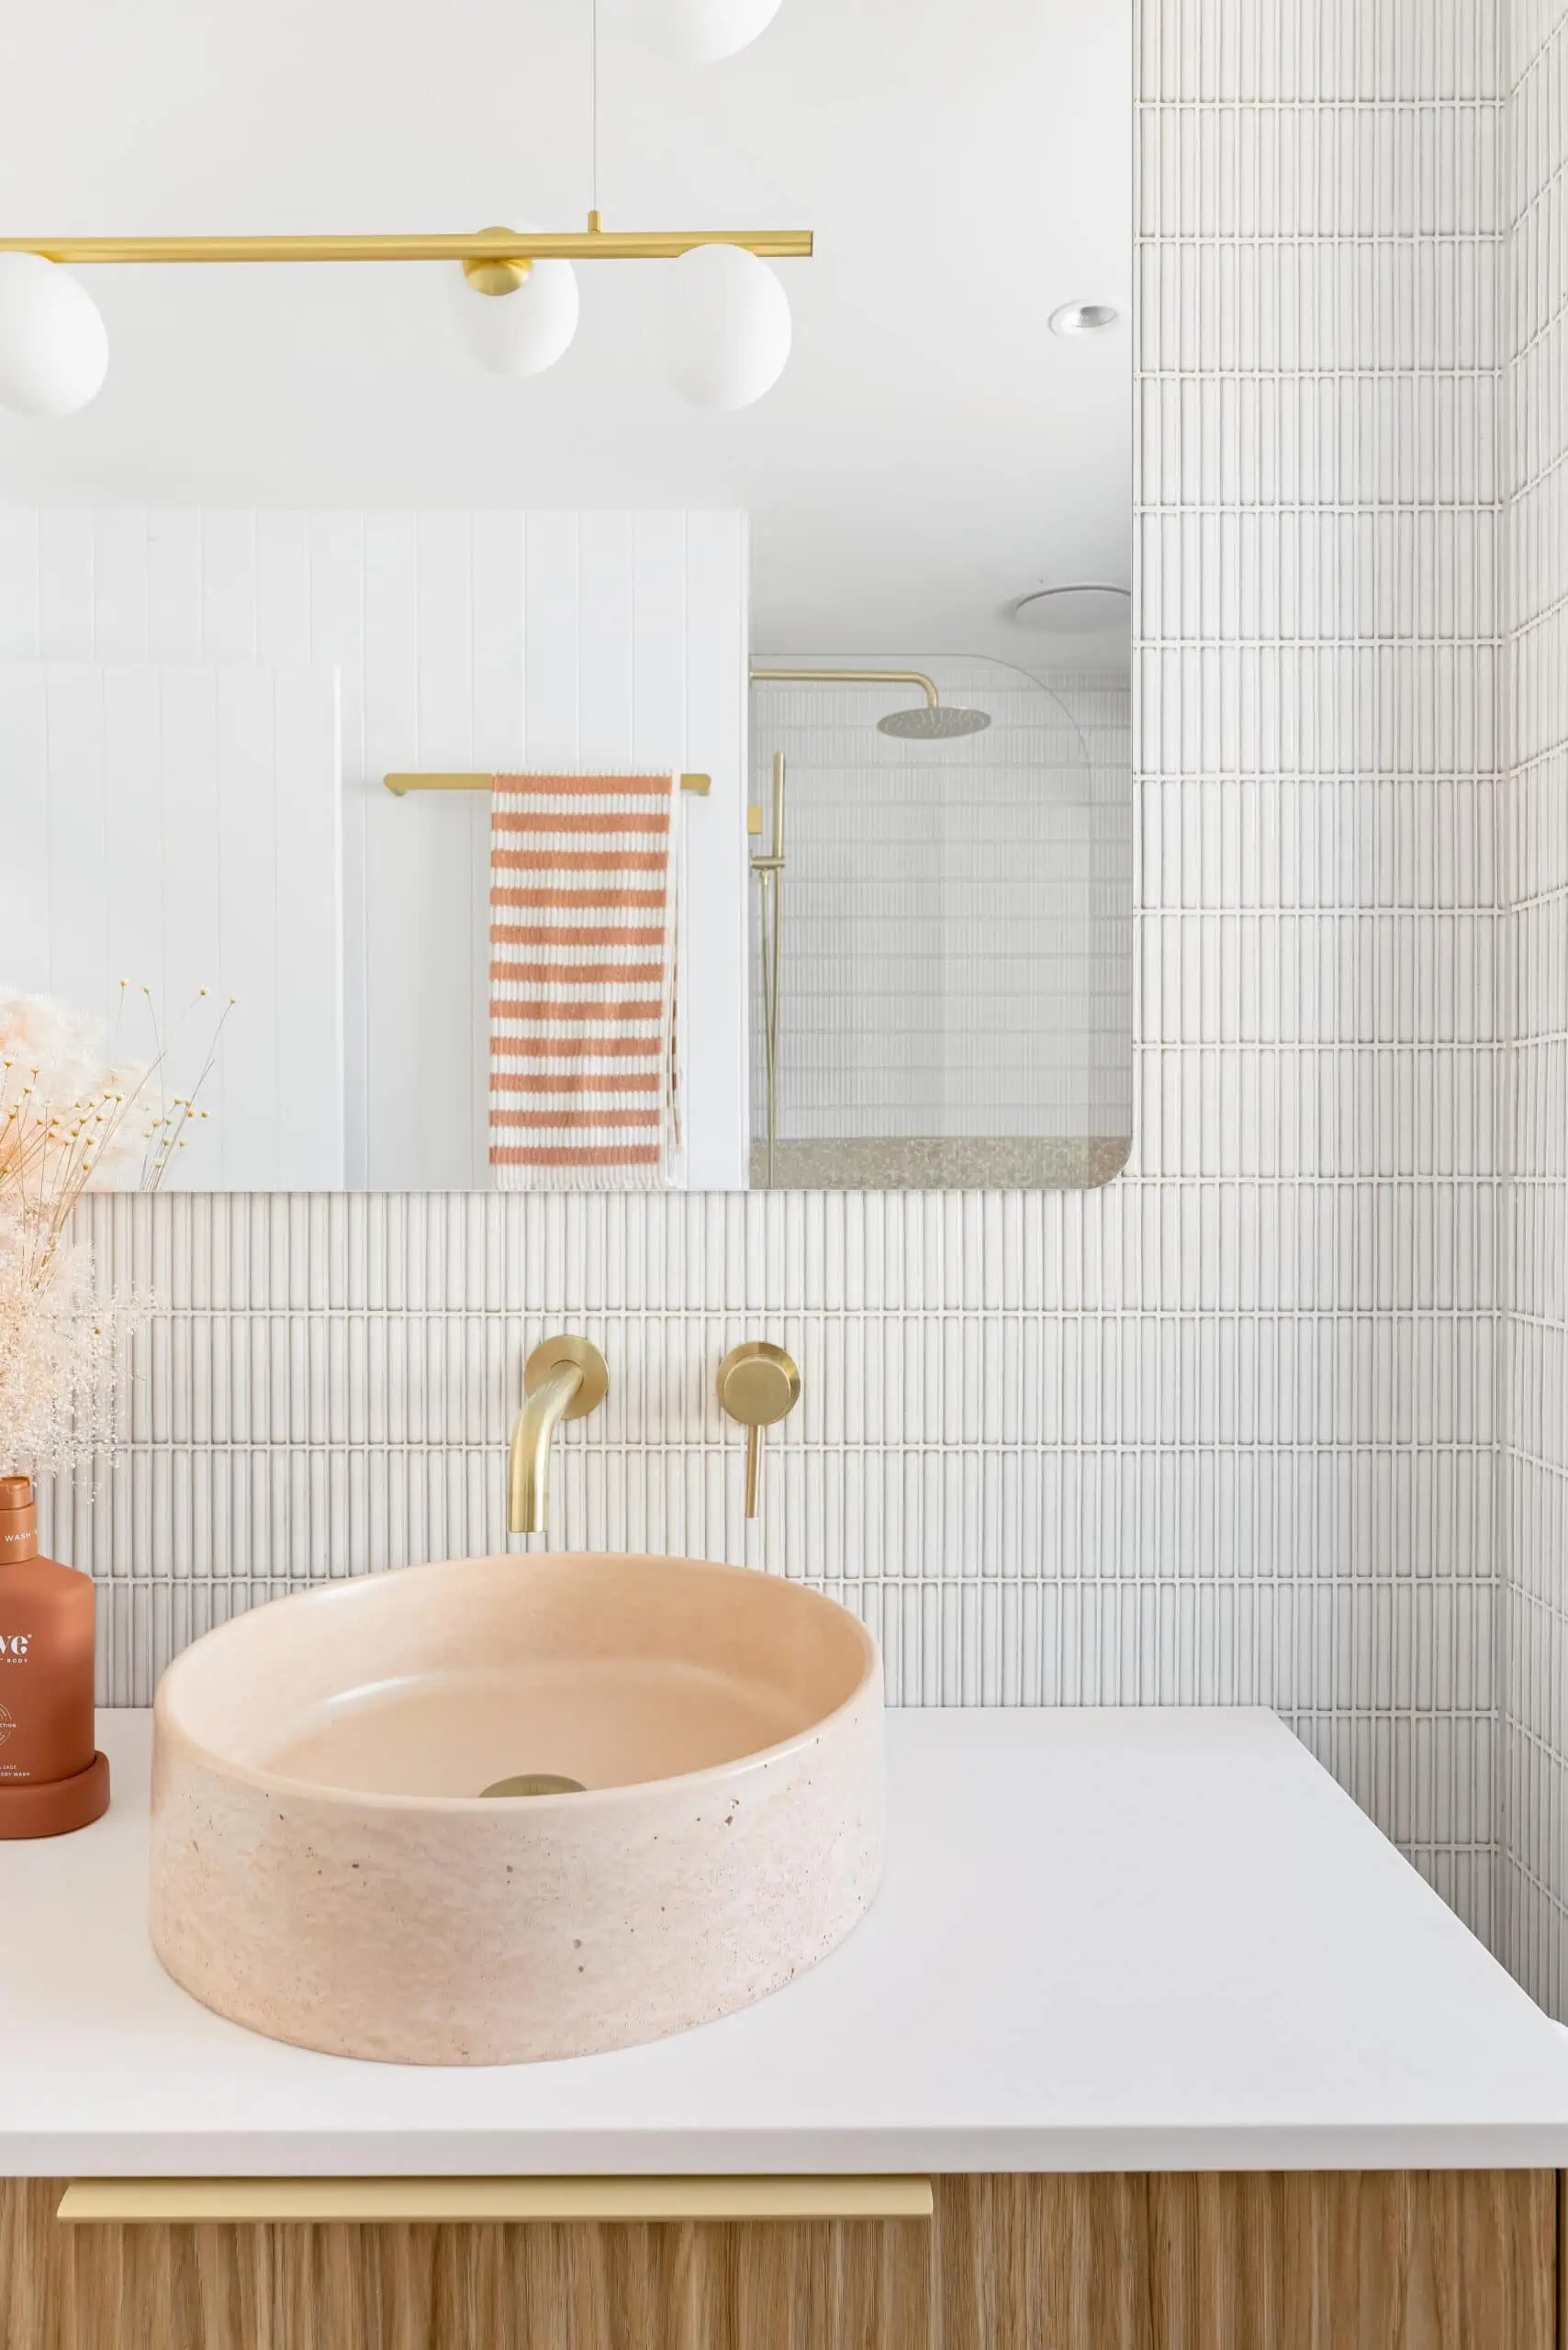 blush pink, gold and white aesthetic in a new bathroom renovation. Pink sink, gold taps and large mirror featured.